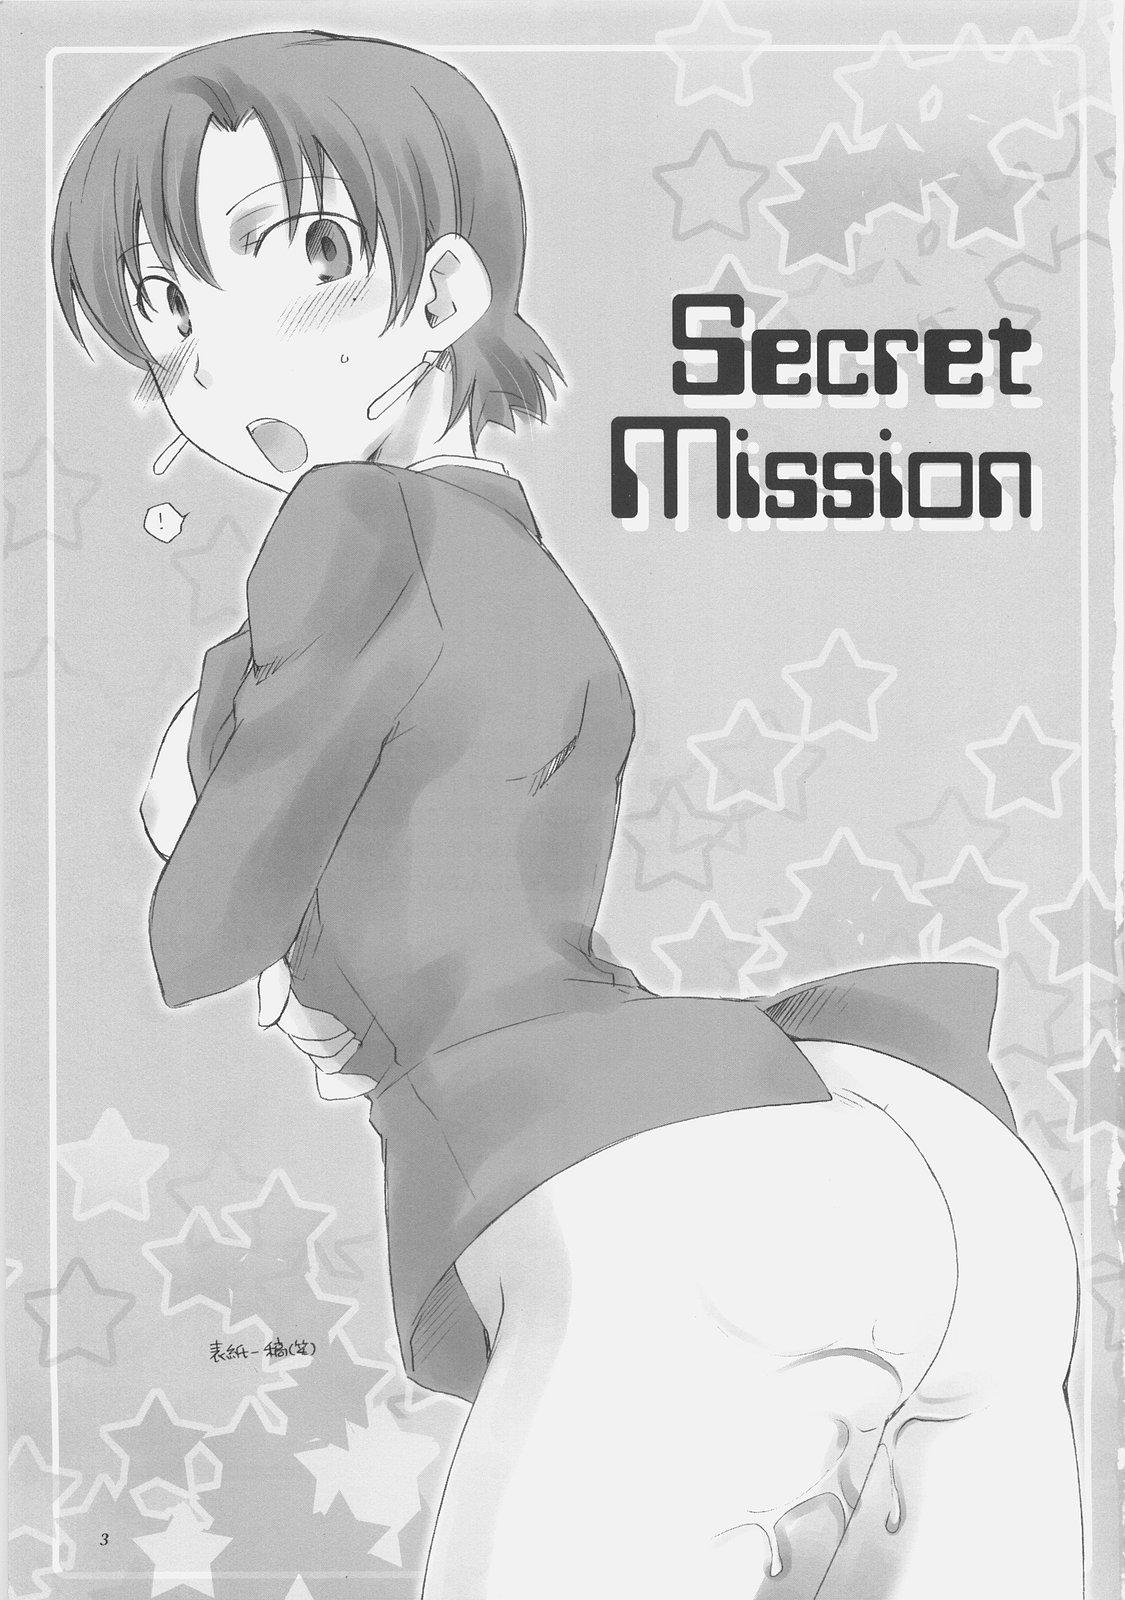 Pussylick Secret Mission - Fate hollow ataraxia Homemade - Page 2